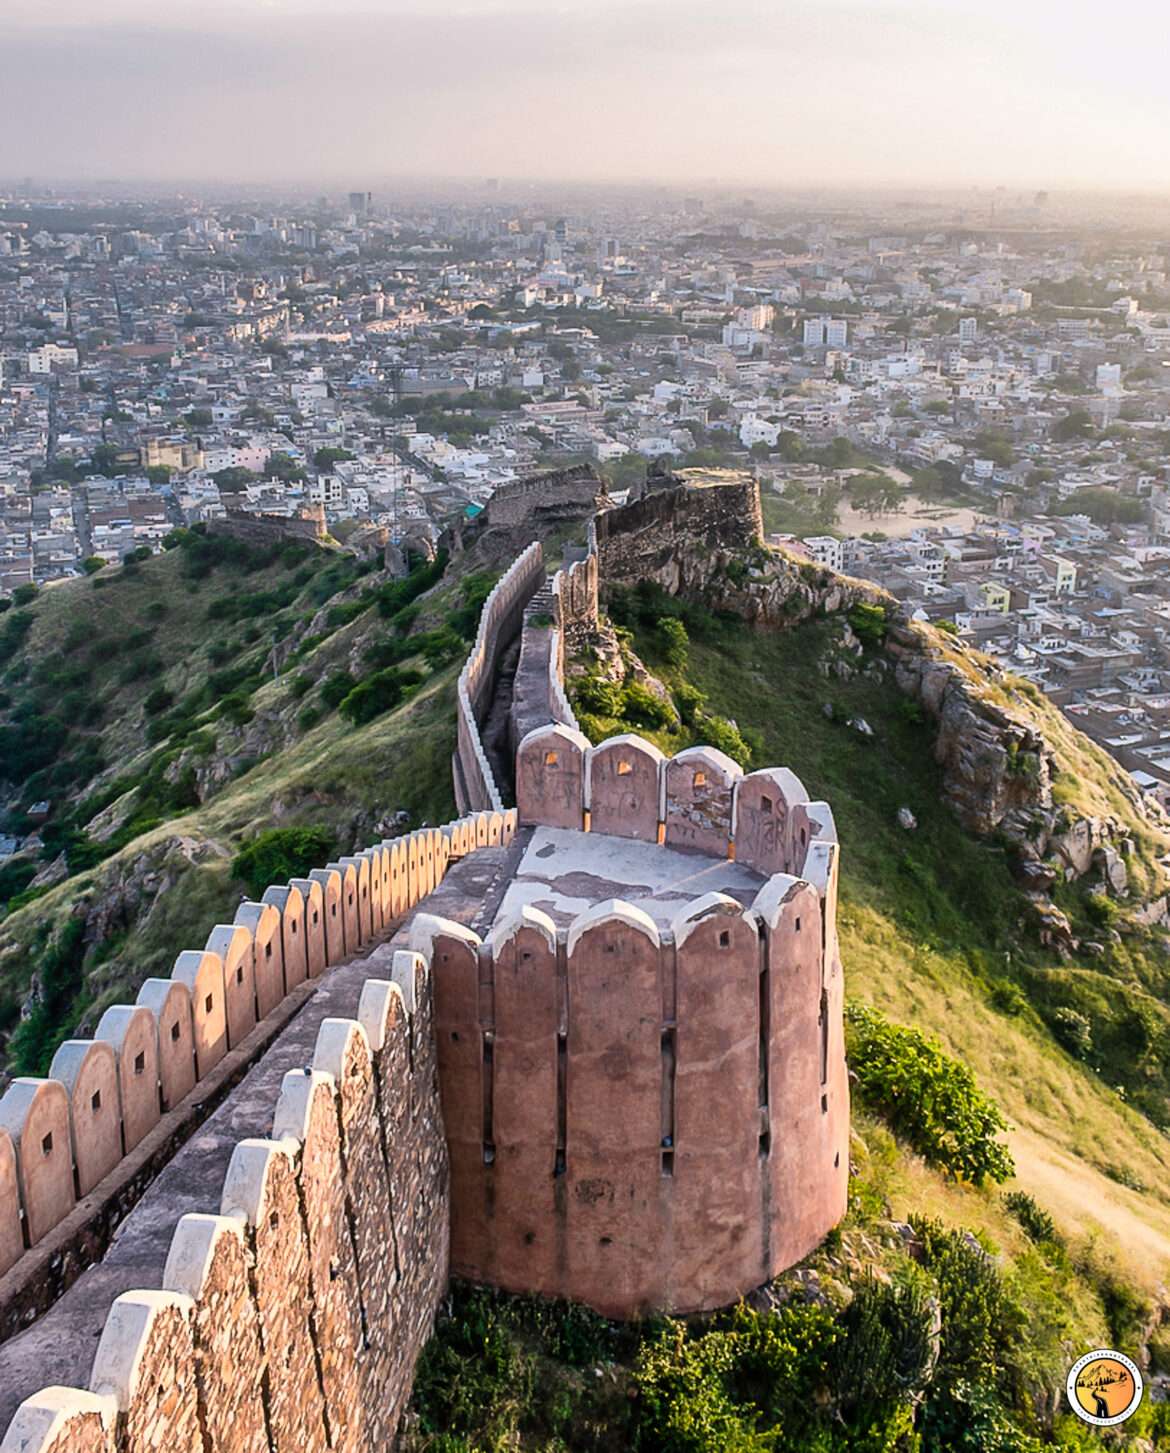 Rising Above Jaipur – The Majestic Nahargarh Fort